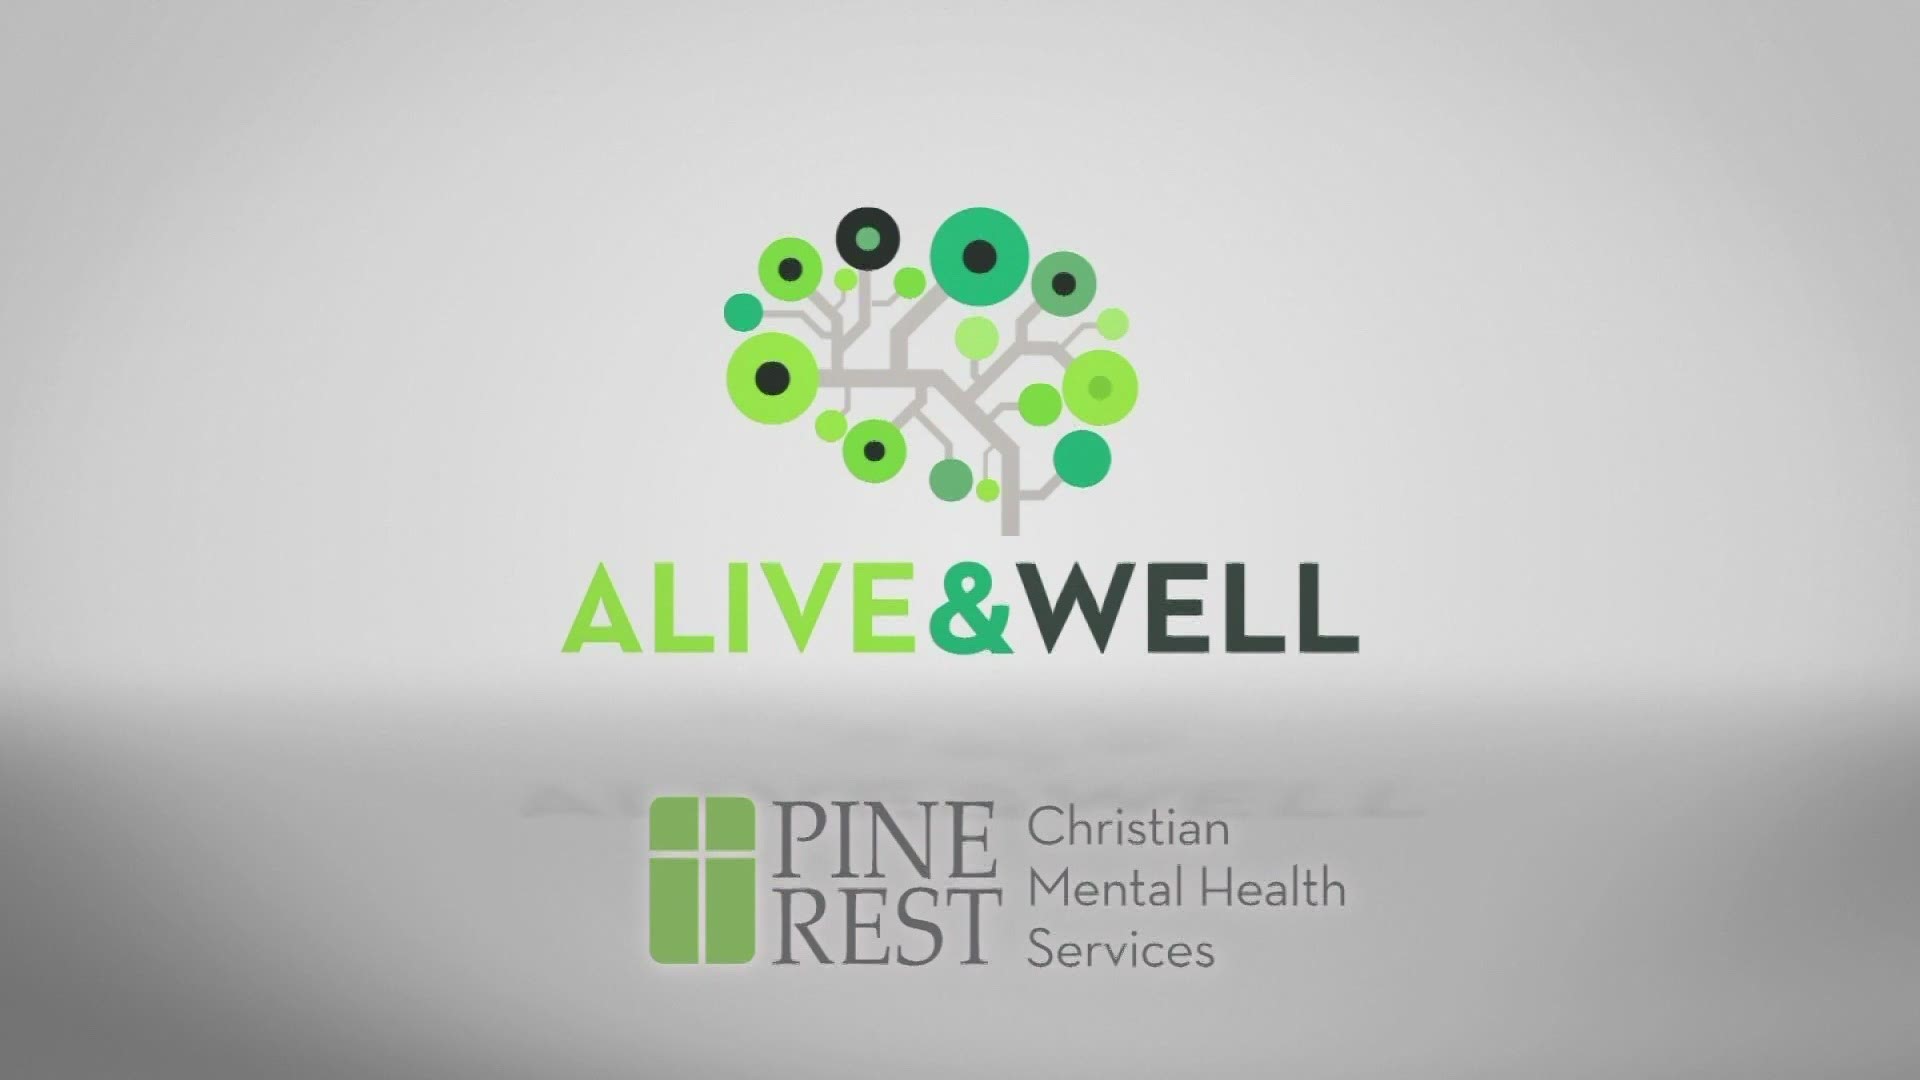 We talked with Dr. Ron DeVries from Pine Rest Christian Mental Health Services who had some tips to help counteract cabin fever.